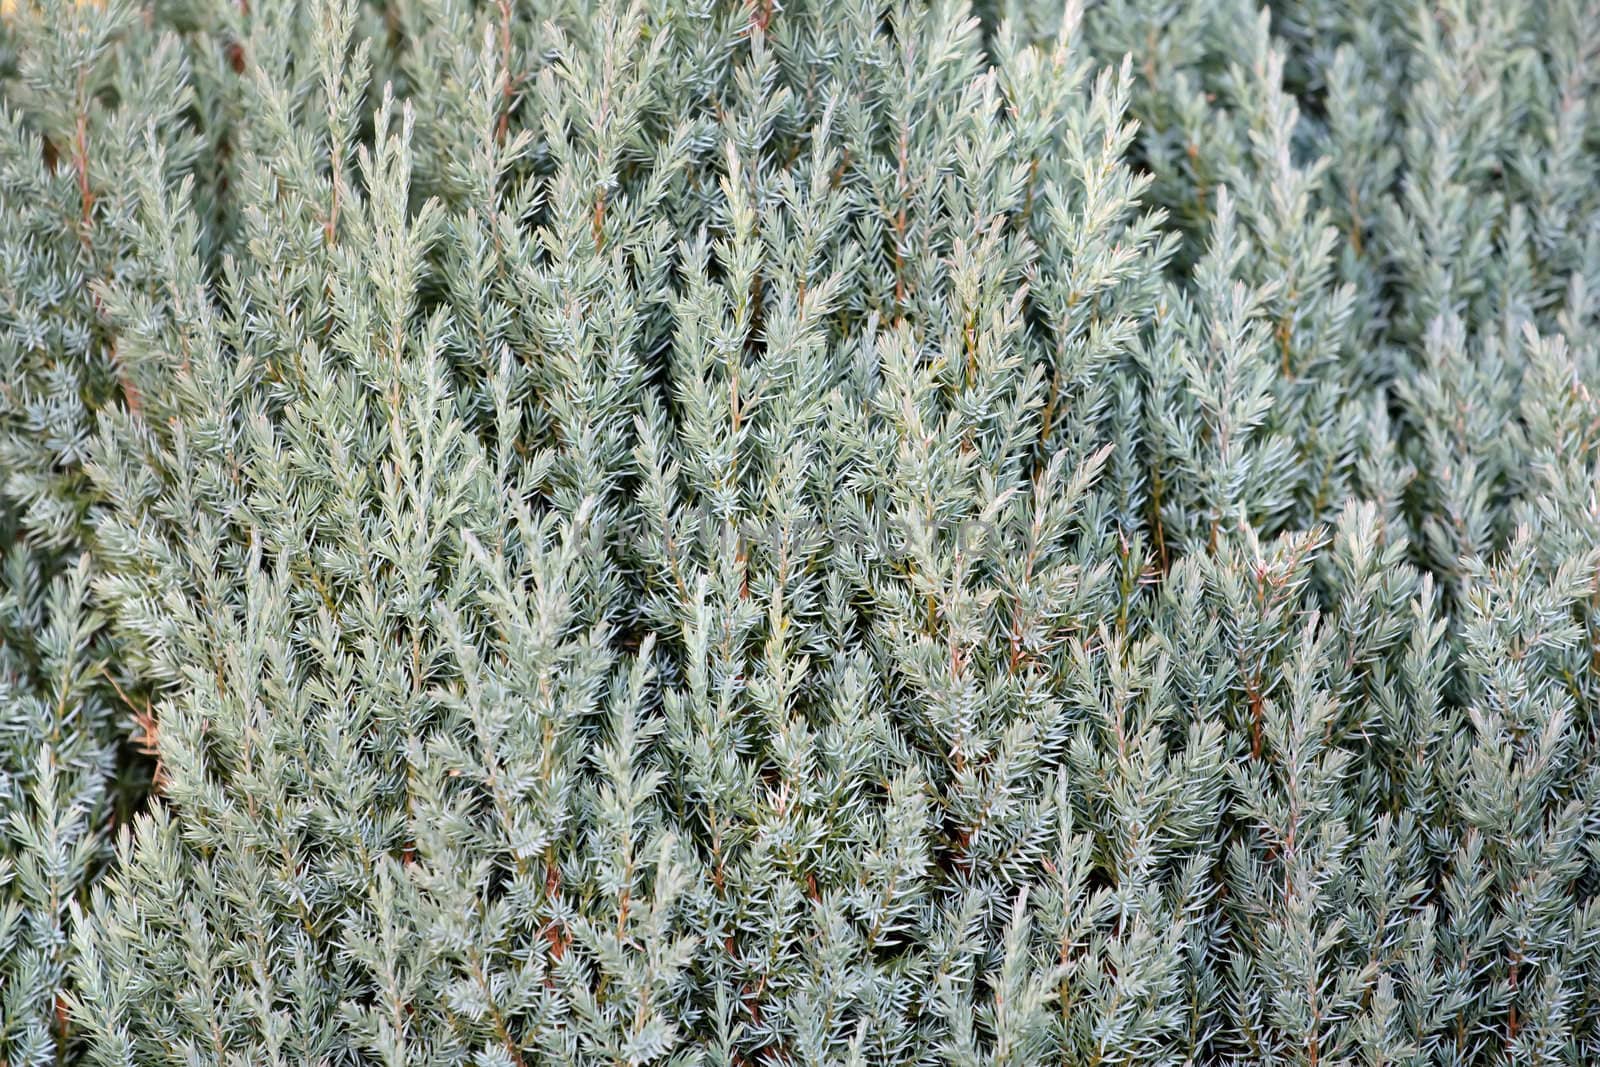 Needles,Conifer for texture or background use